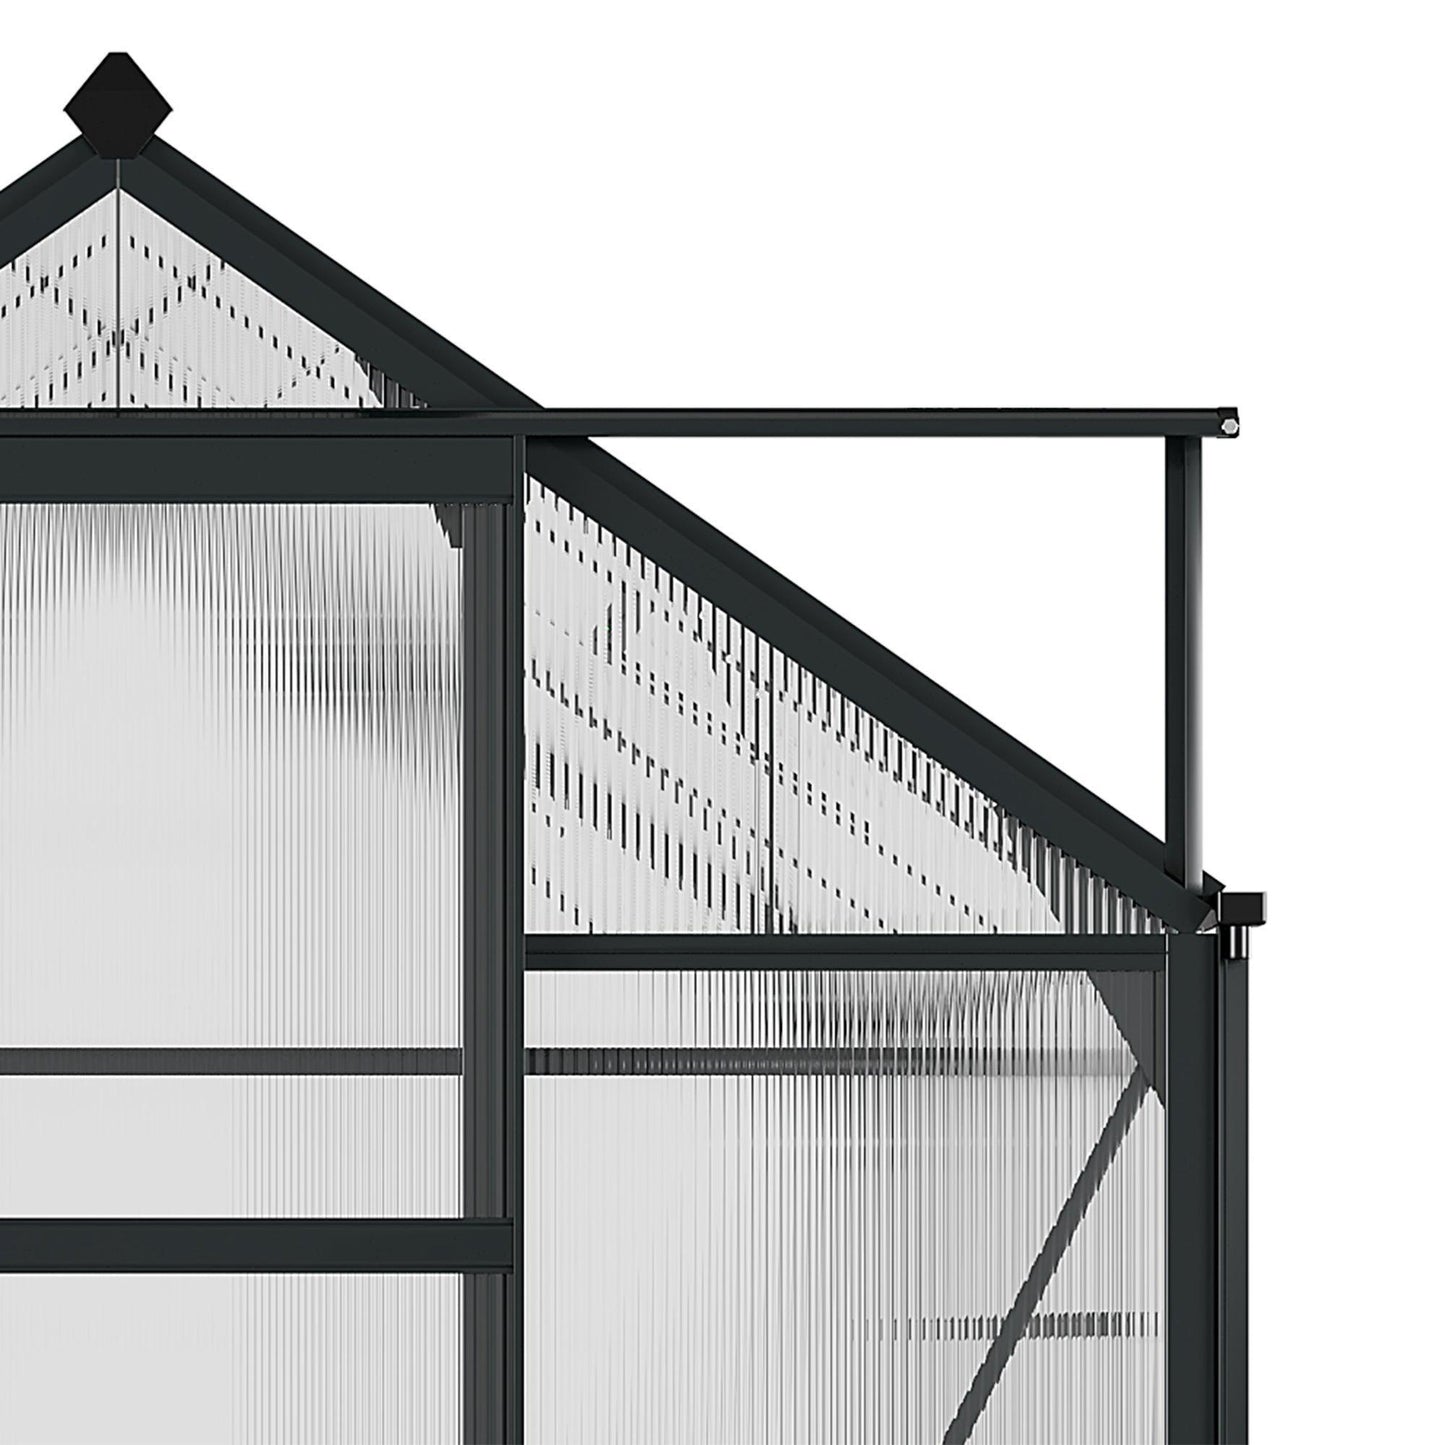 Outsunny Clear Polycarbonate Walk-In Greenhouse - EasyGrow 6x8ft - ALL4U RETAILER LTD